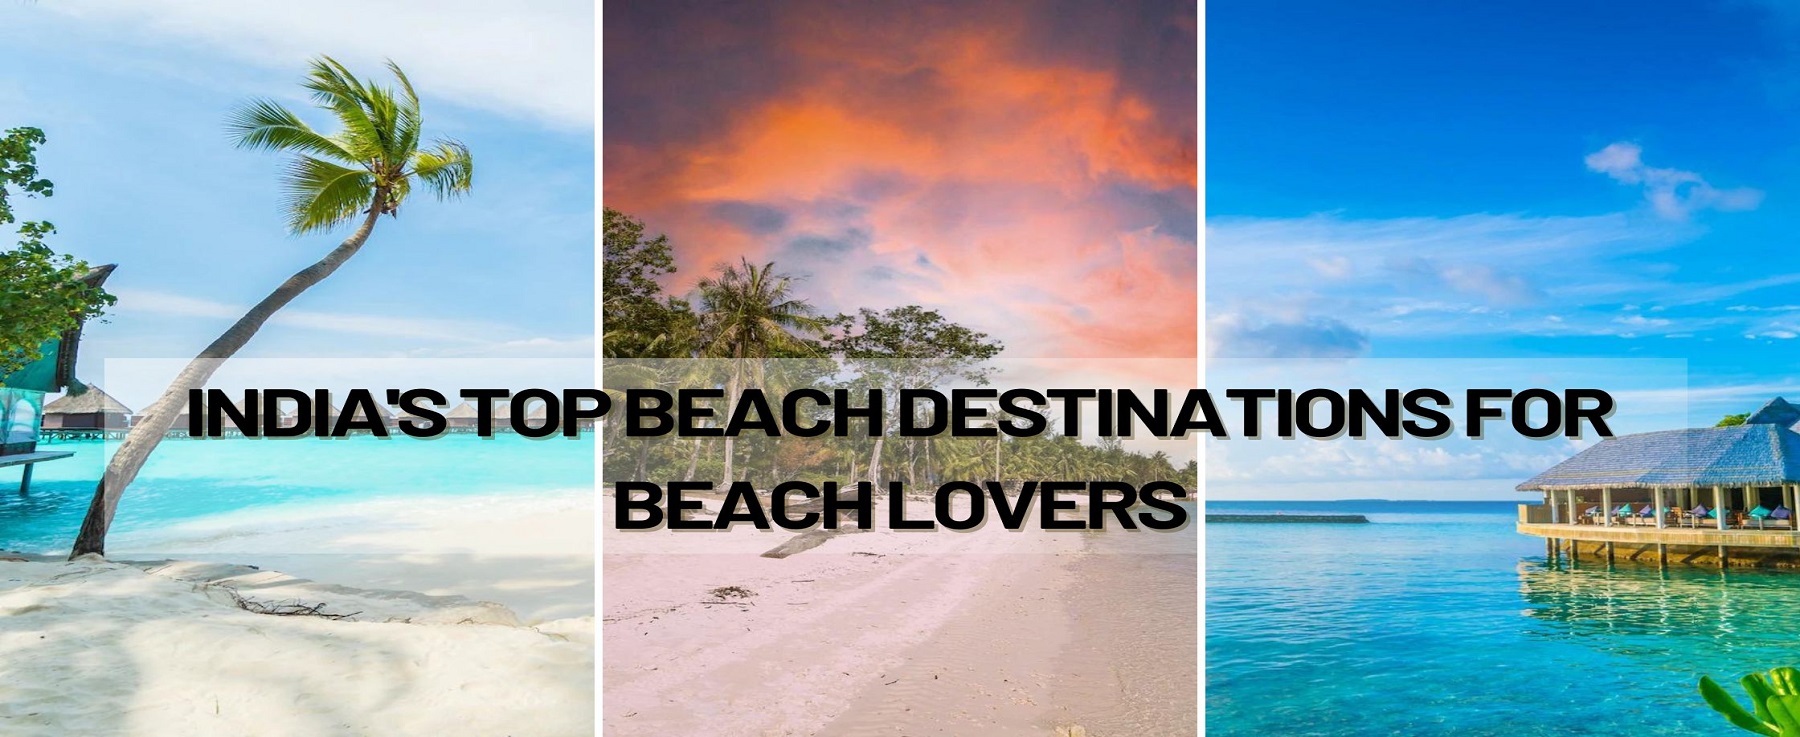 India's Top Beach Destinations For Beach Lovers